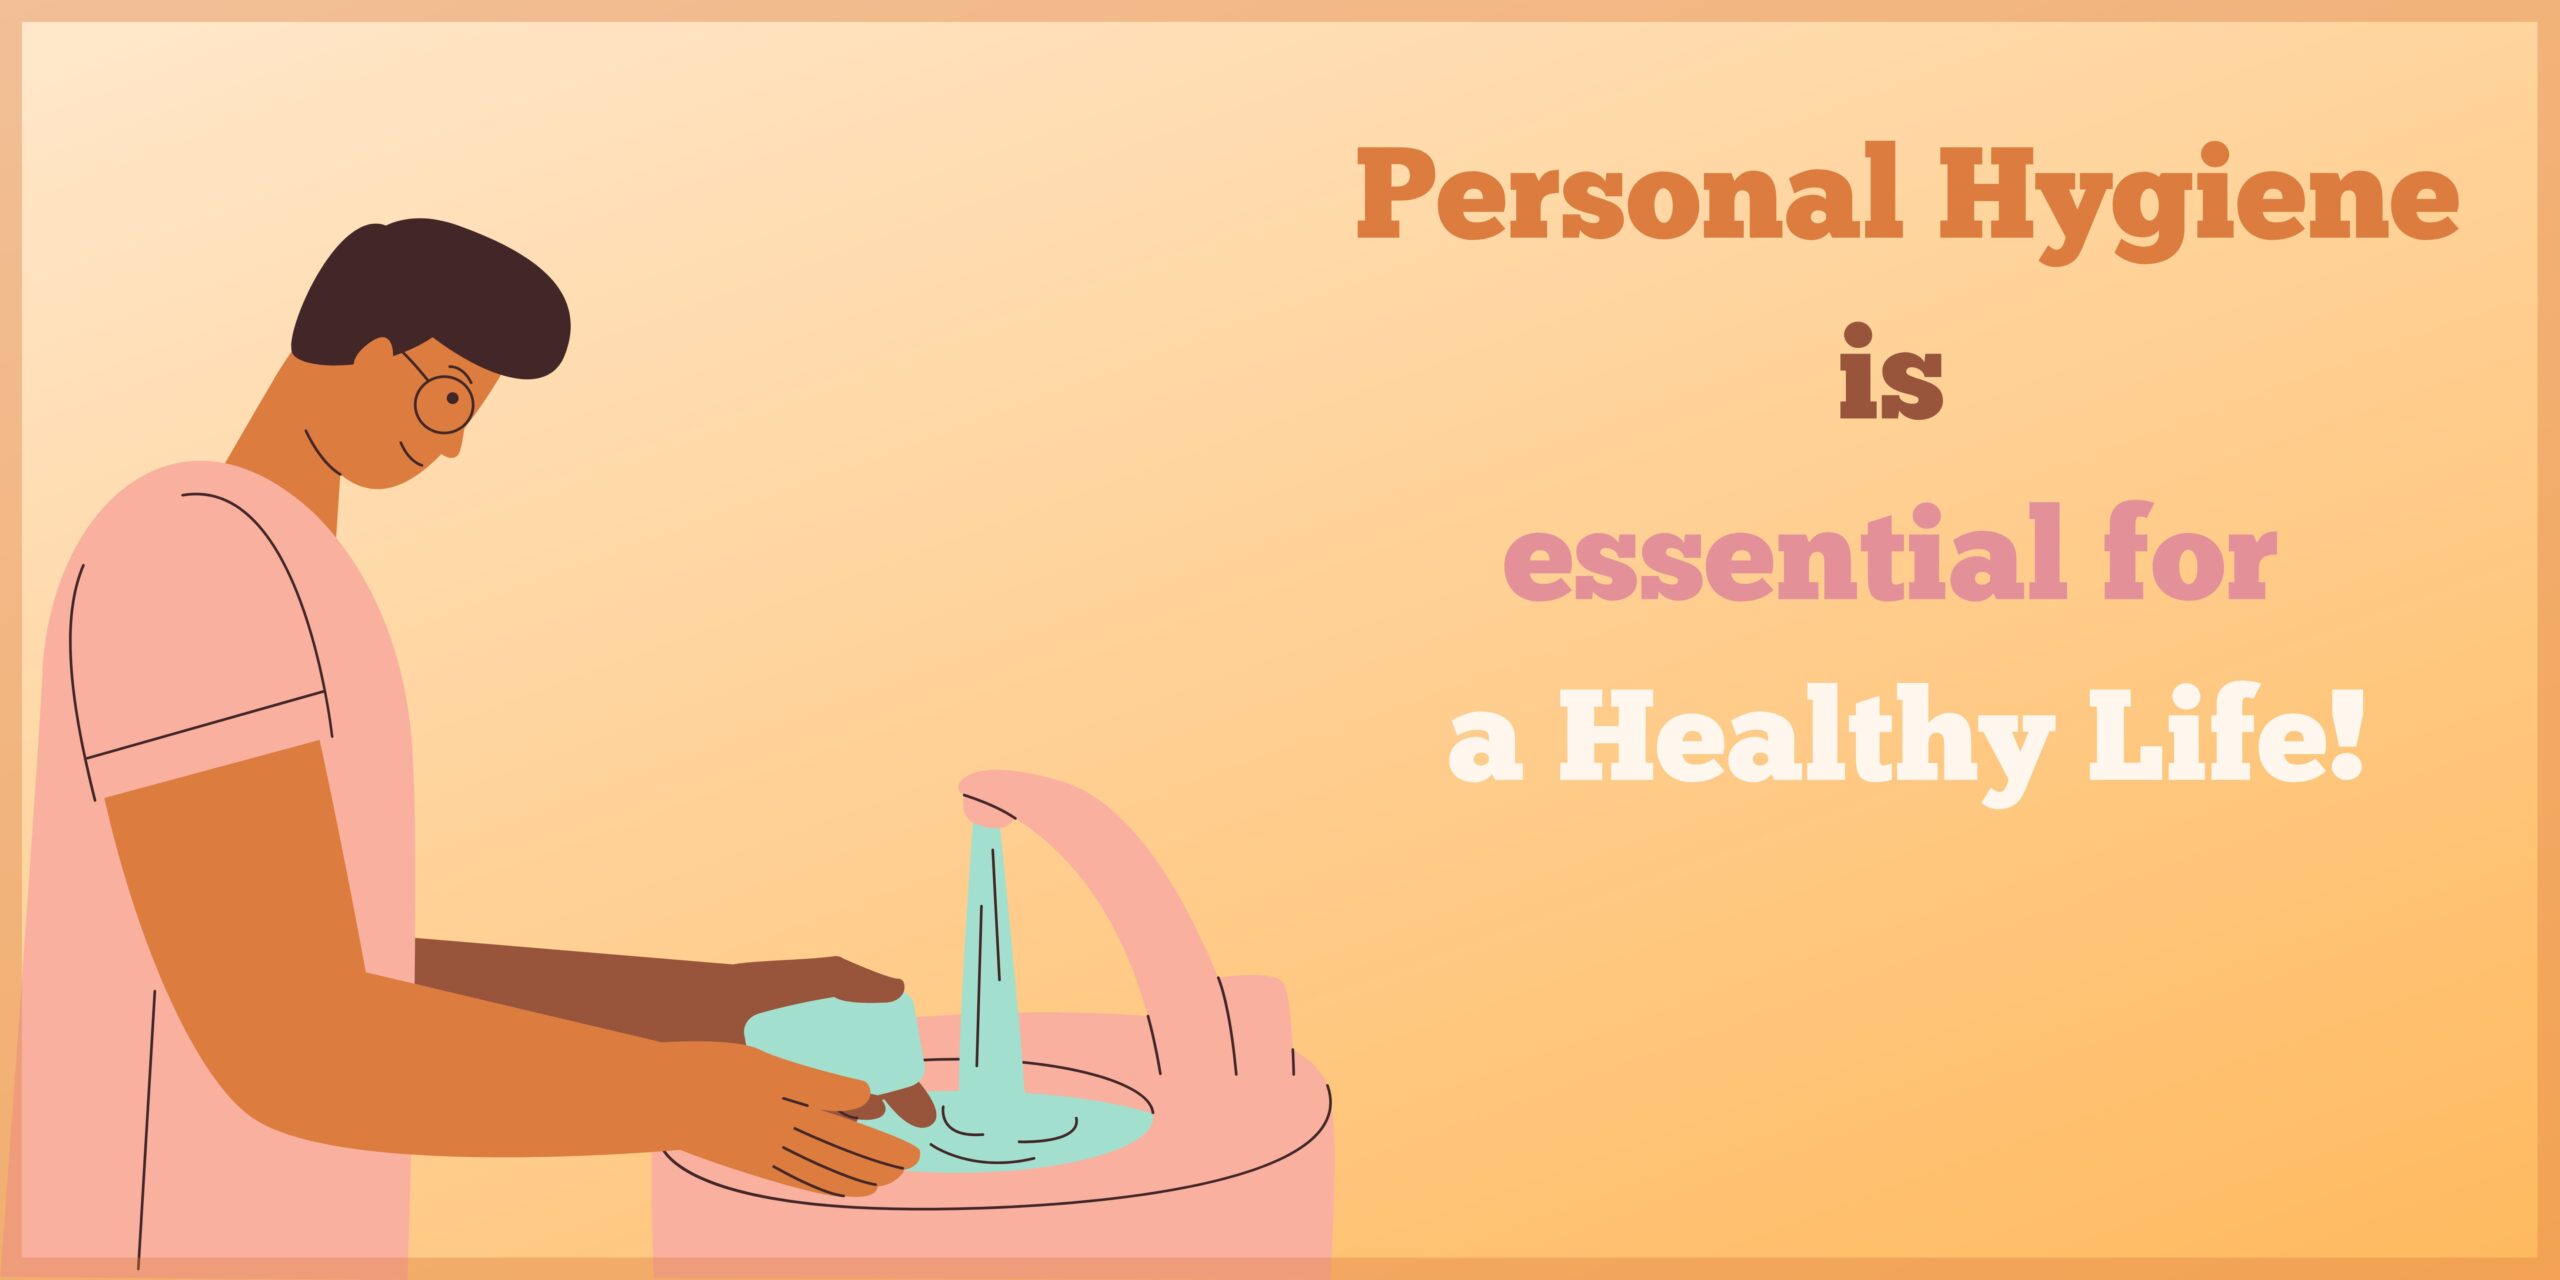 Personal Hygiene is essential for a healthy life!